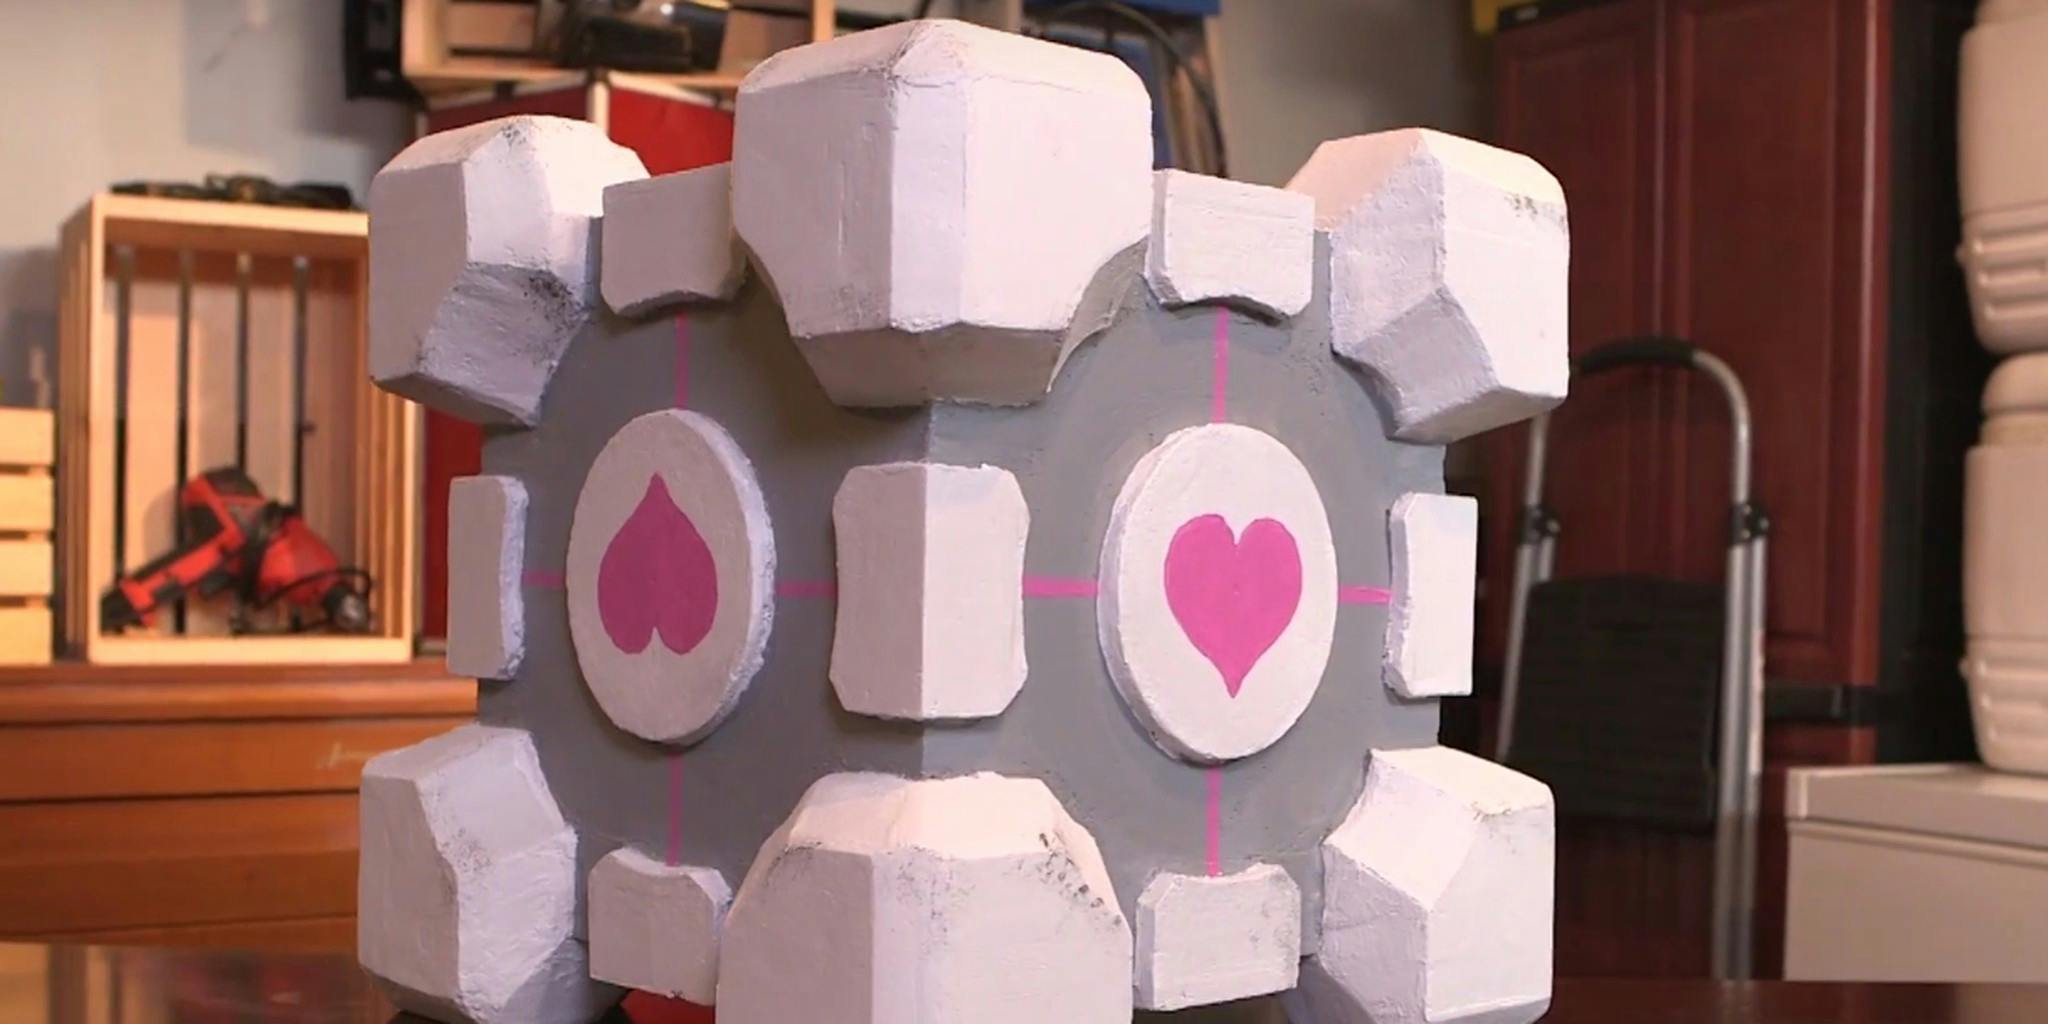 Here's how to build your own 'Portal' companion cube for less than $50